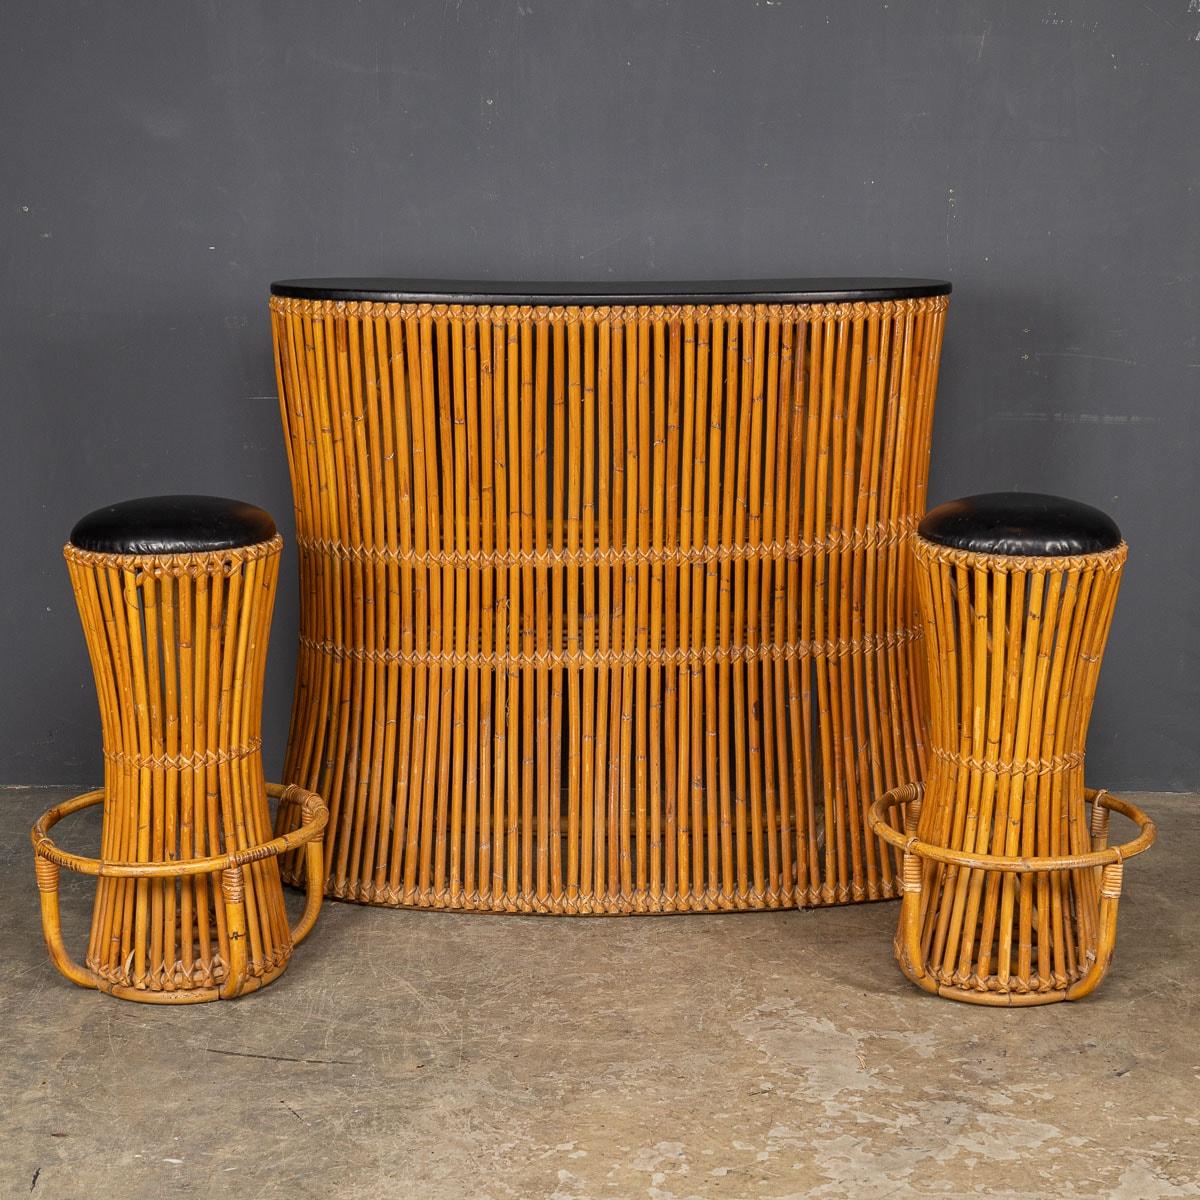 20th Century Italian Standing Bamboo Dry Bar & Stools, c.1960 In Good Condition For Sale In Royal Tunbridge Wells, Kent